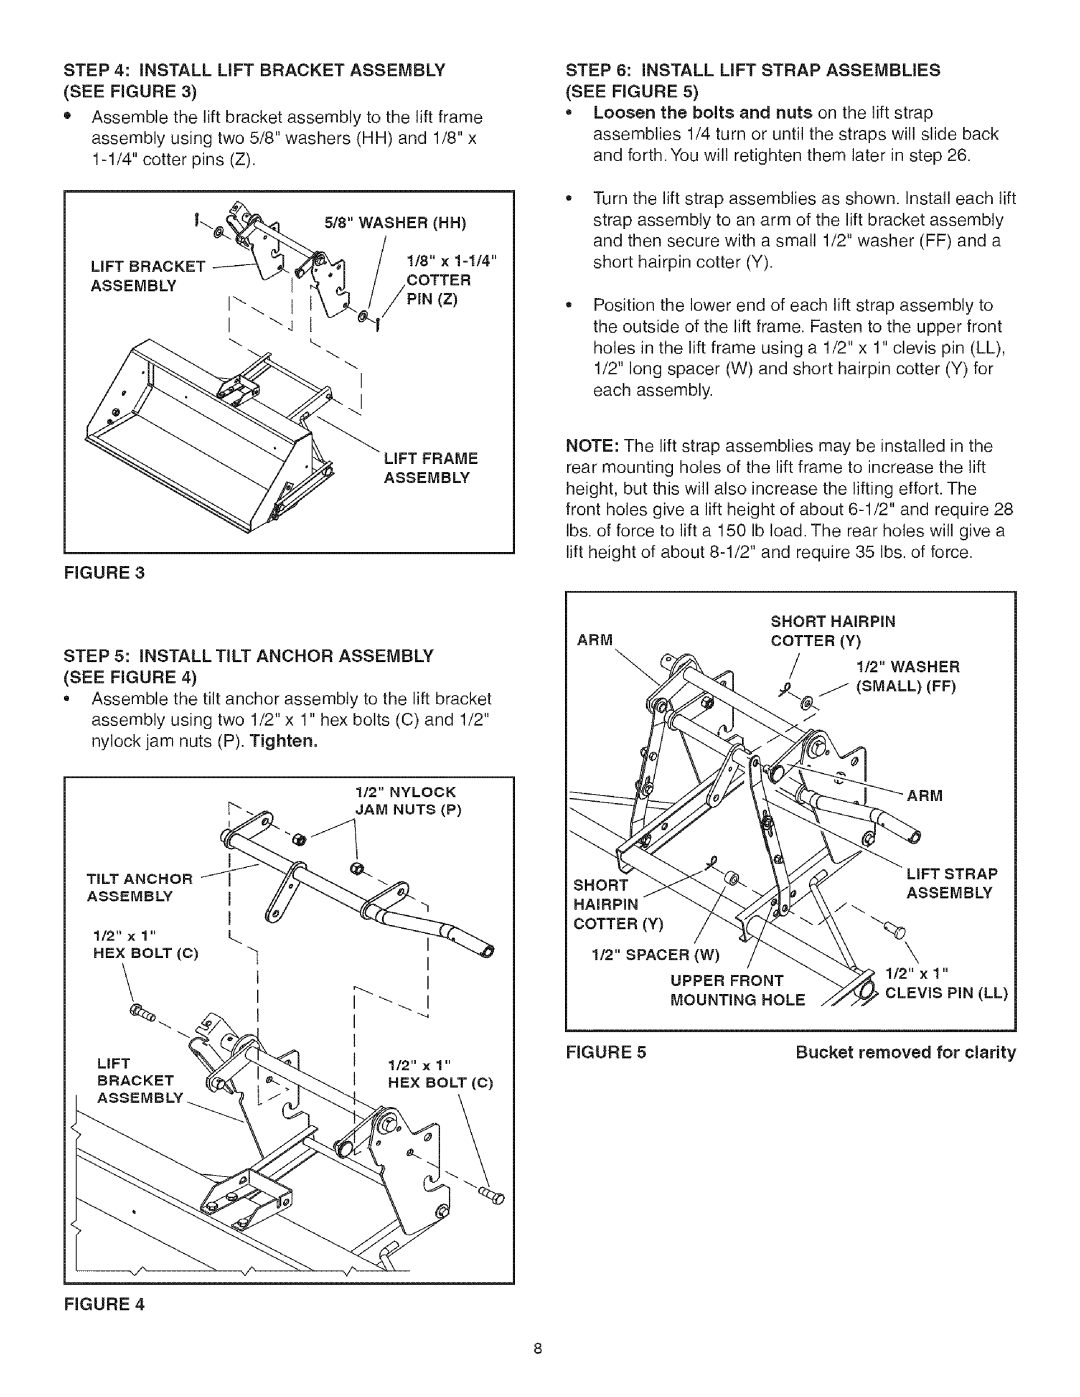 Craftsman 486.248473 manual See Figure, Cotter Y, Lift Strap, Assembly, 1/2, Clevis Pin Ll, Bucket removed for clarity 